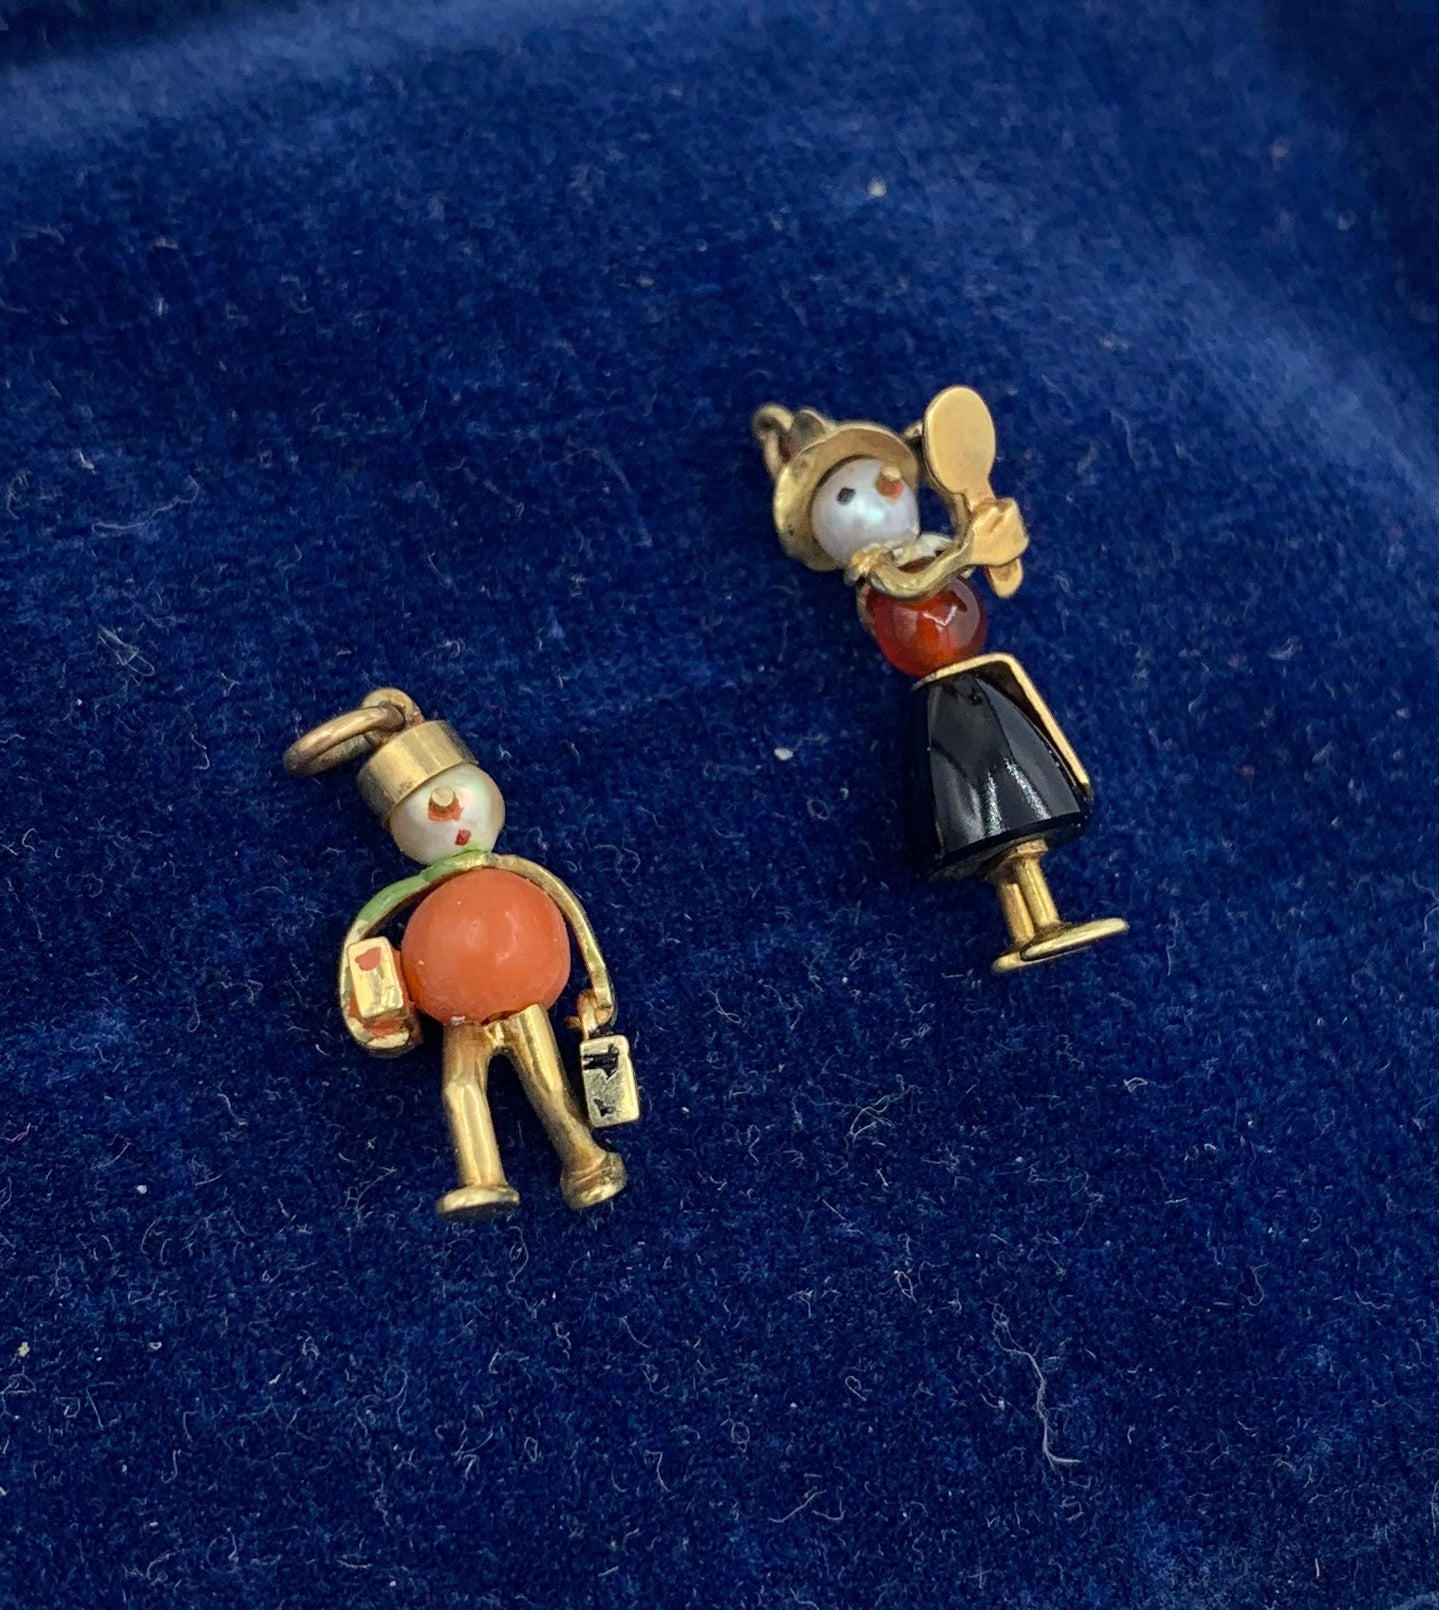 THIS IS A WONDERFUL PAIR OF JEWELED ANTIQUE ART DECO PENDANTS OR CHARMS IN THE FORM OF BELLHOP CARRYING SUITCASES AND A LADY WITH A HAT LOOKING AT HERSELF IN THE MIRROR.  THE CHARMS ARE ABSOLUTELY CHARMING AND DELIGHTFUL.  THE BELLHOP CARRIES THE